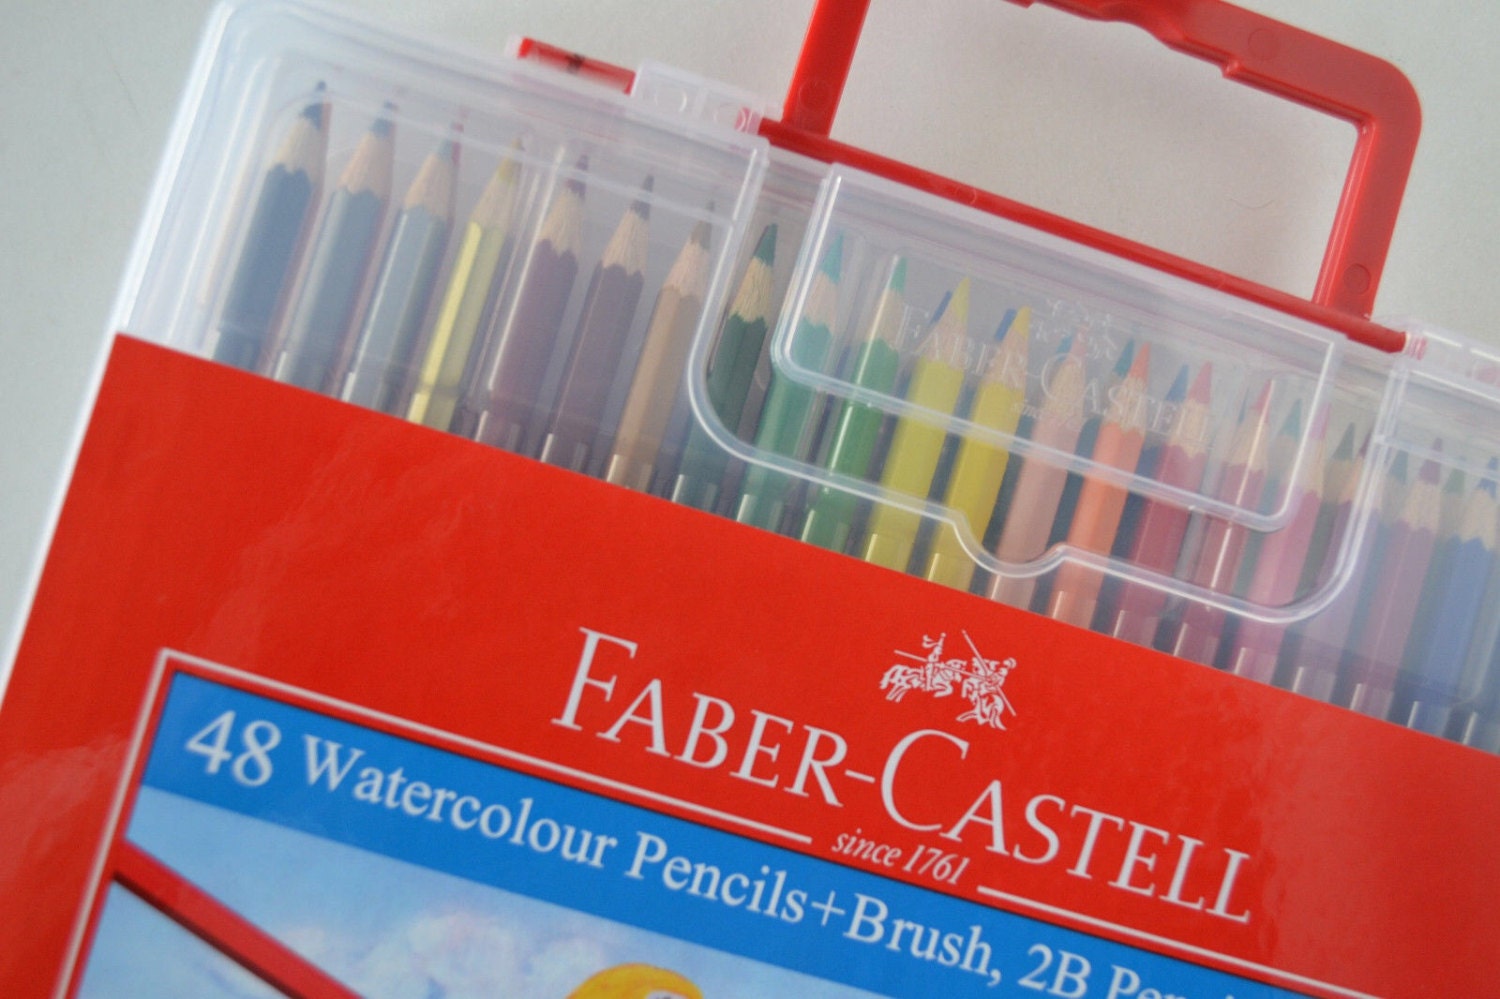  Faber  Castell  Watercolor  Pencils  Set of 48